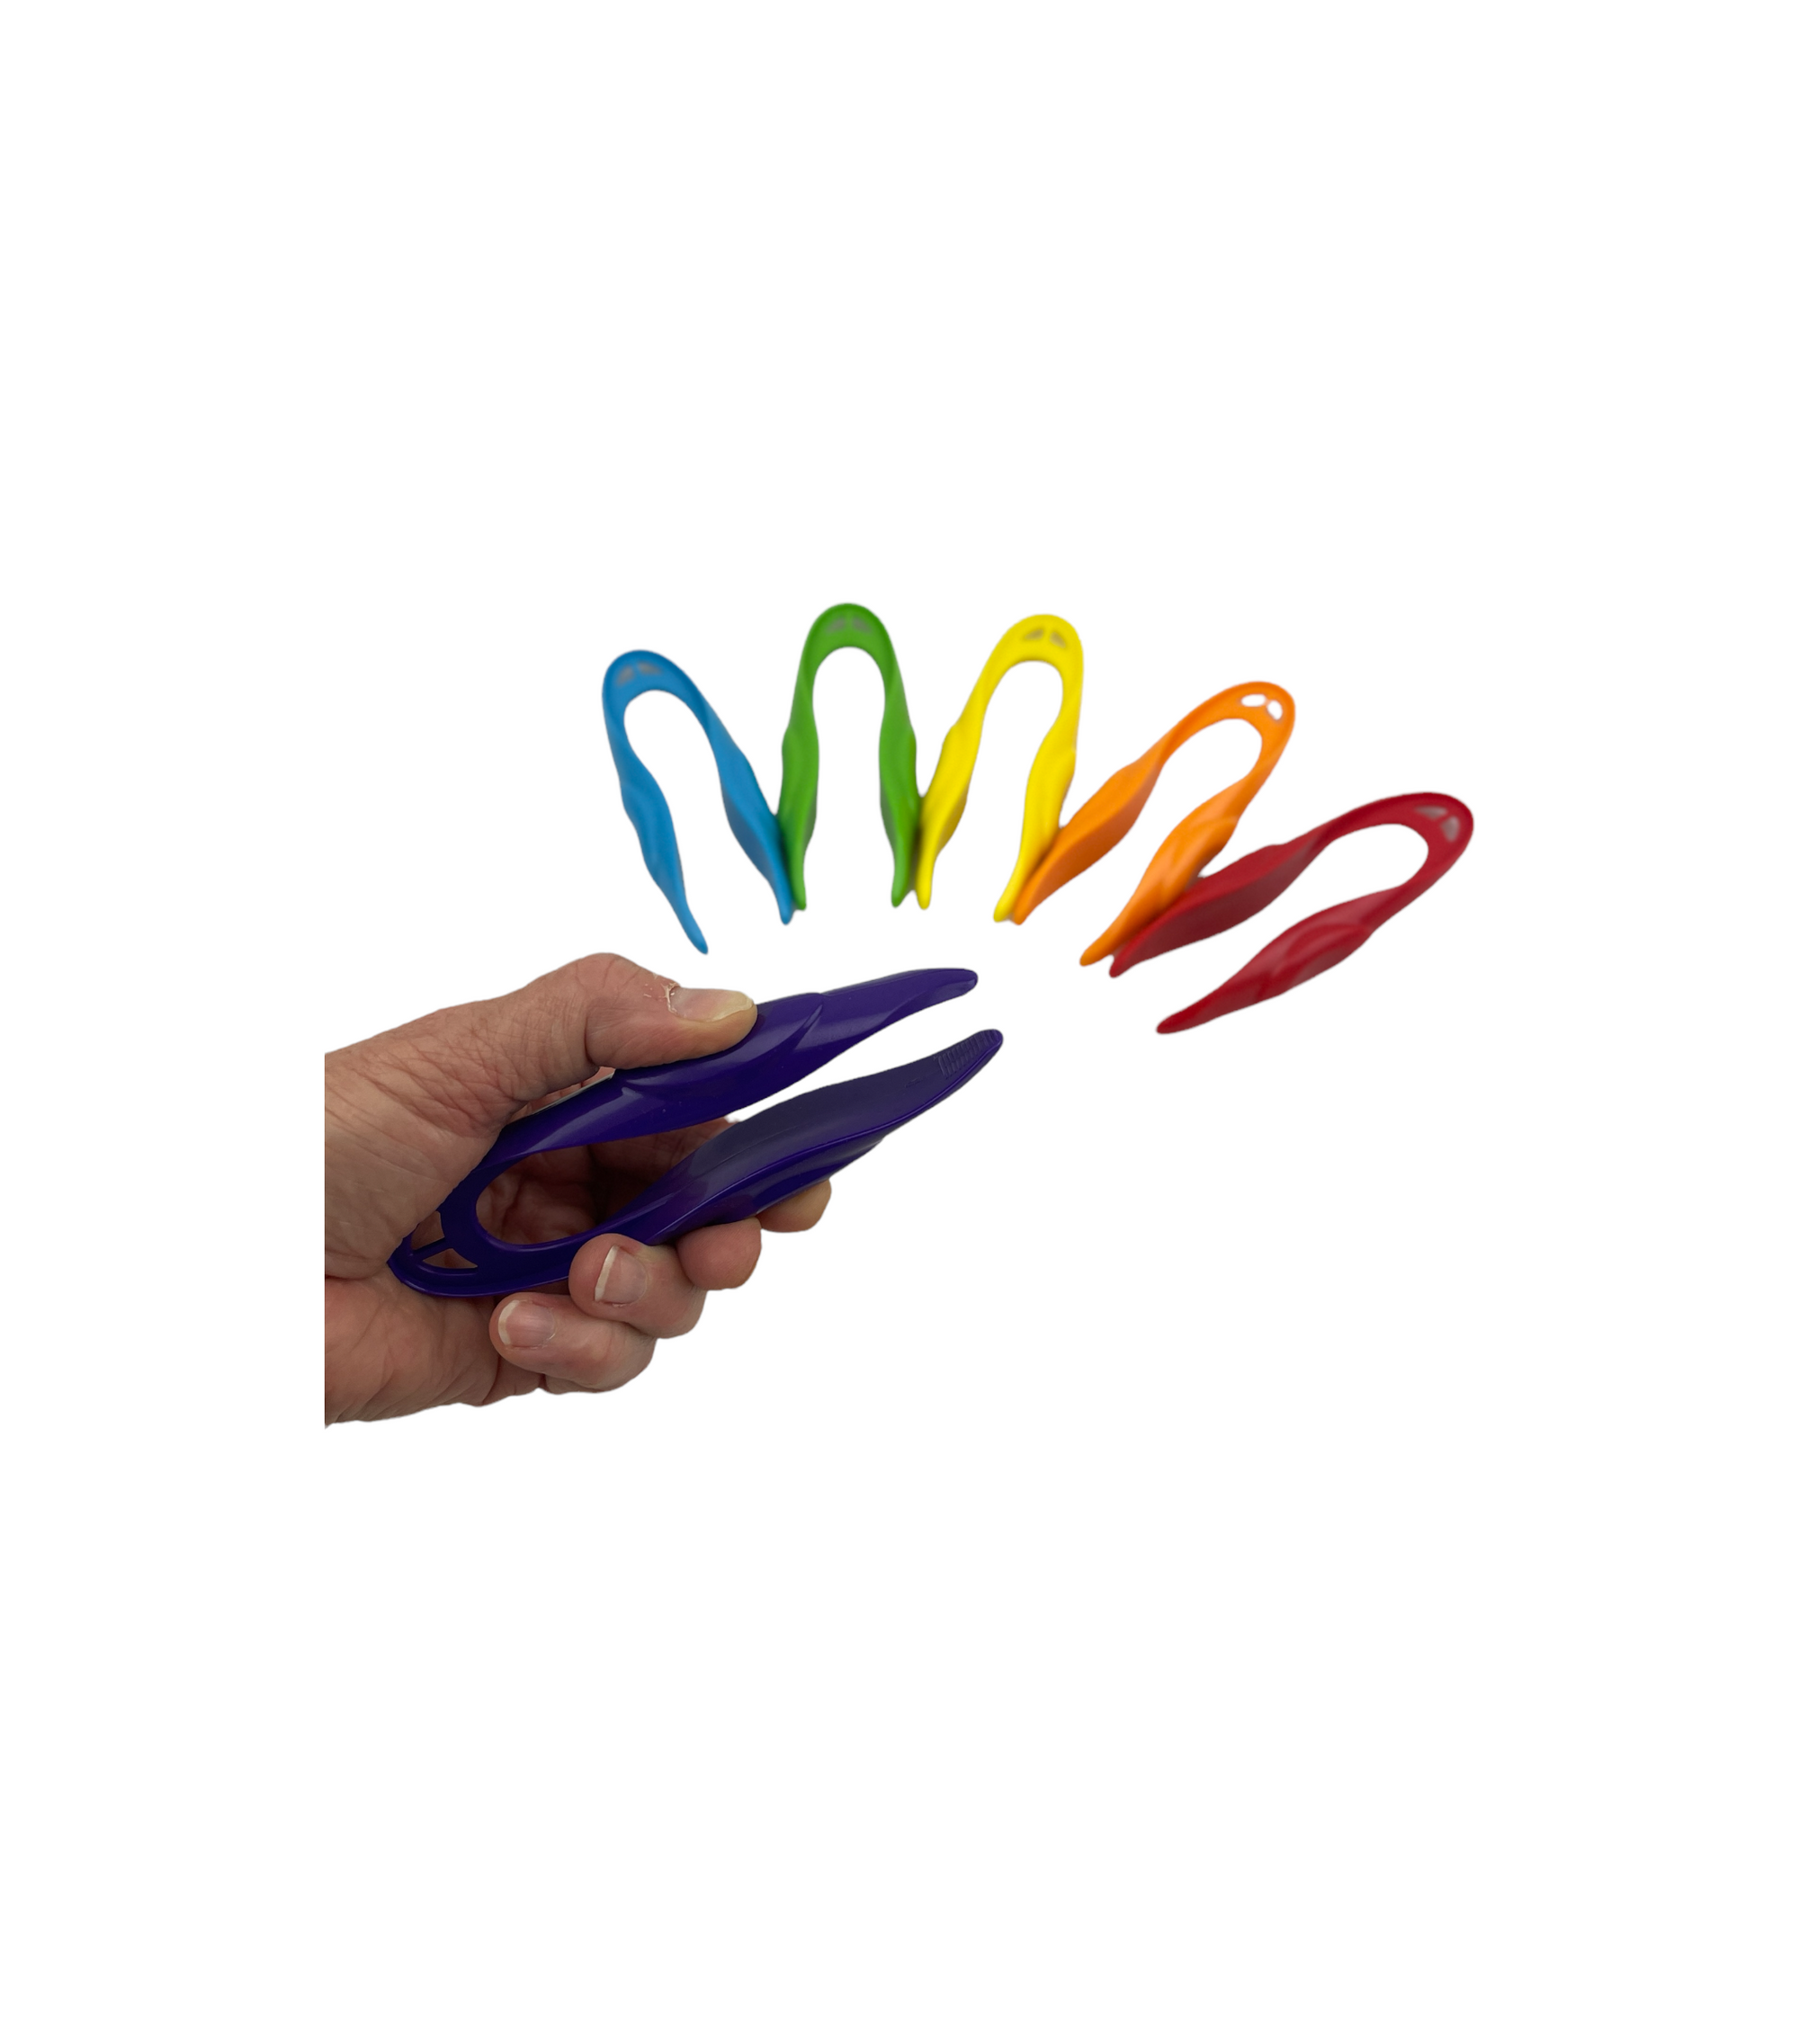 Chunky Kids-Safe Tweezers with hand holding purple set on white background